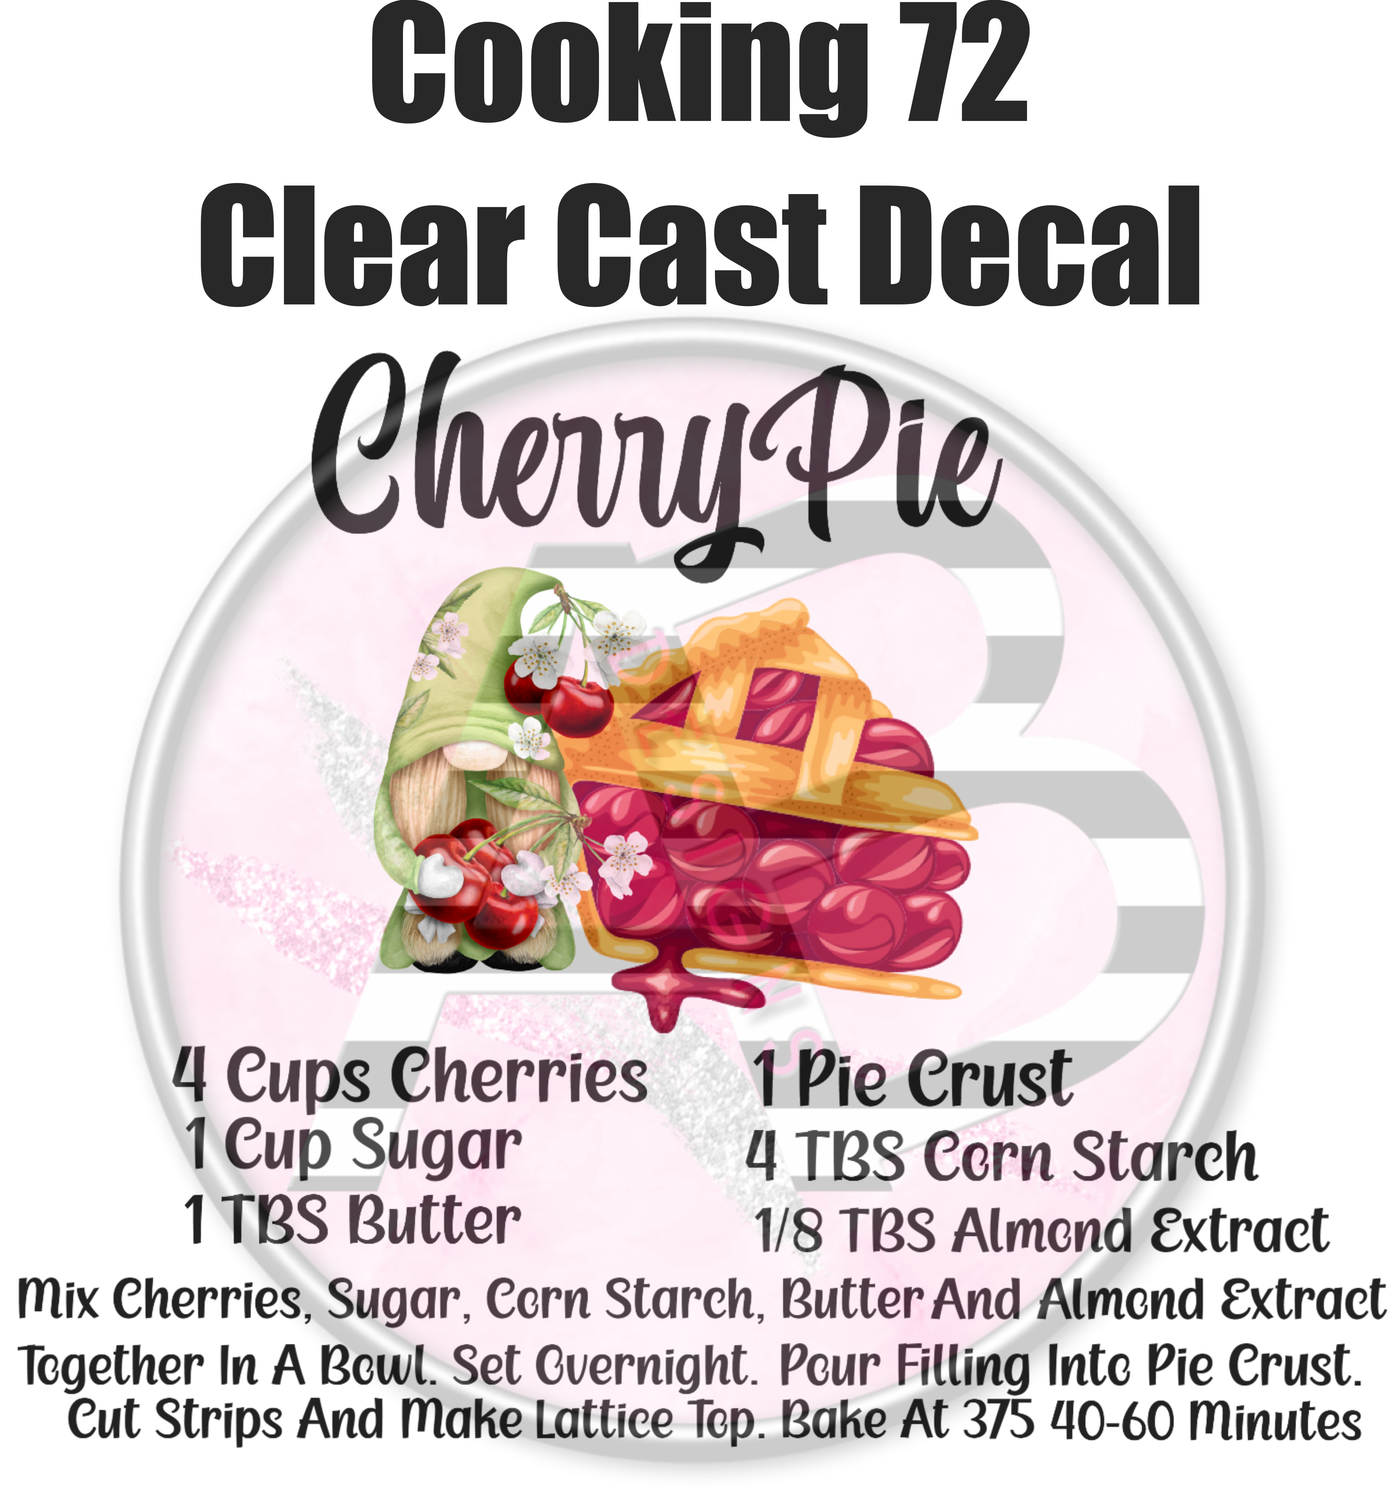 Cooking 72 - Clear Cast Decal - 365